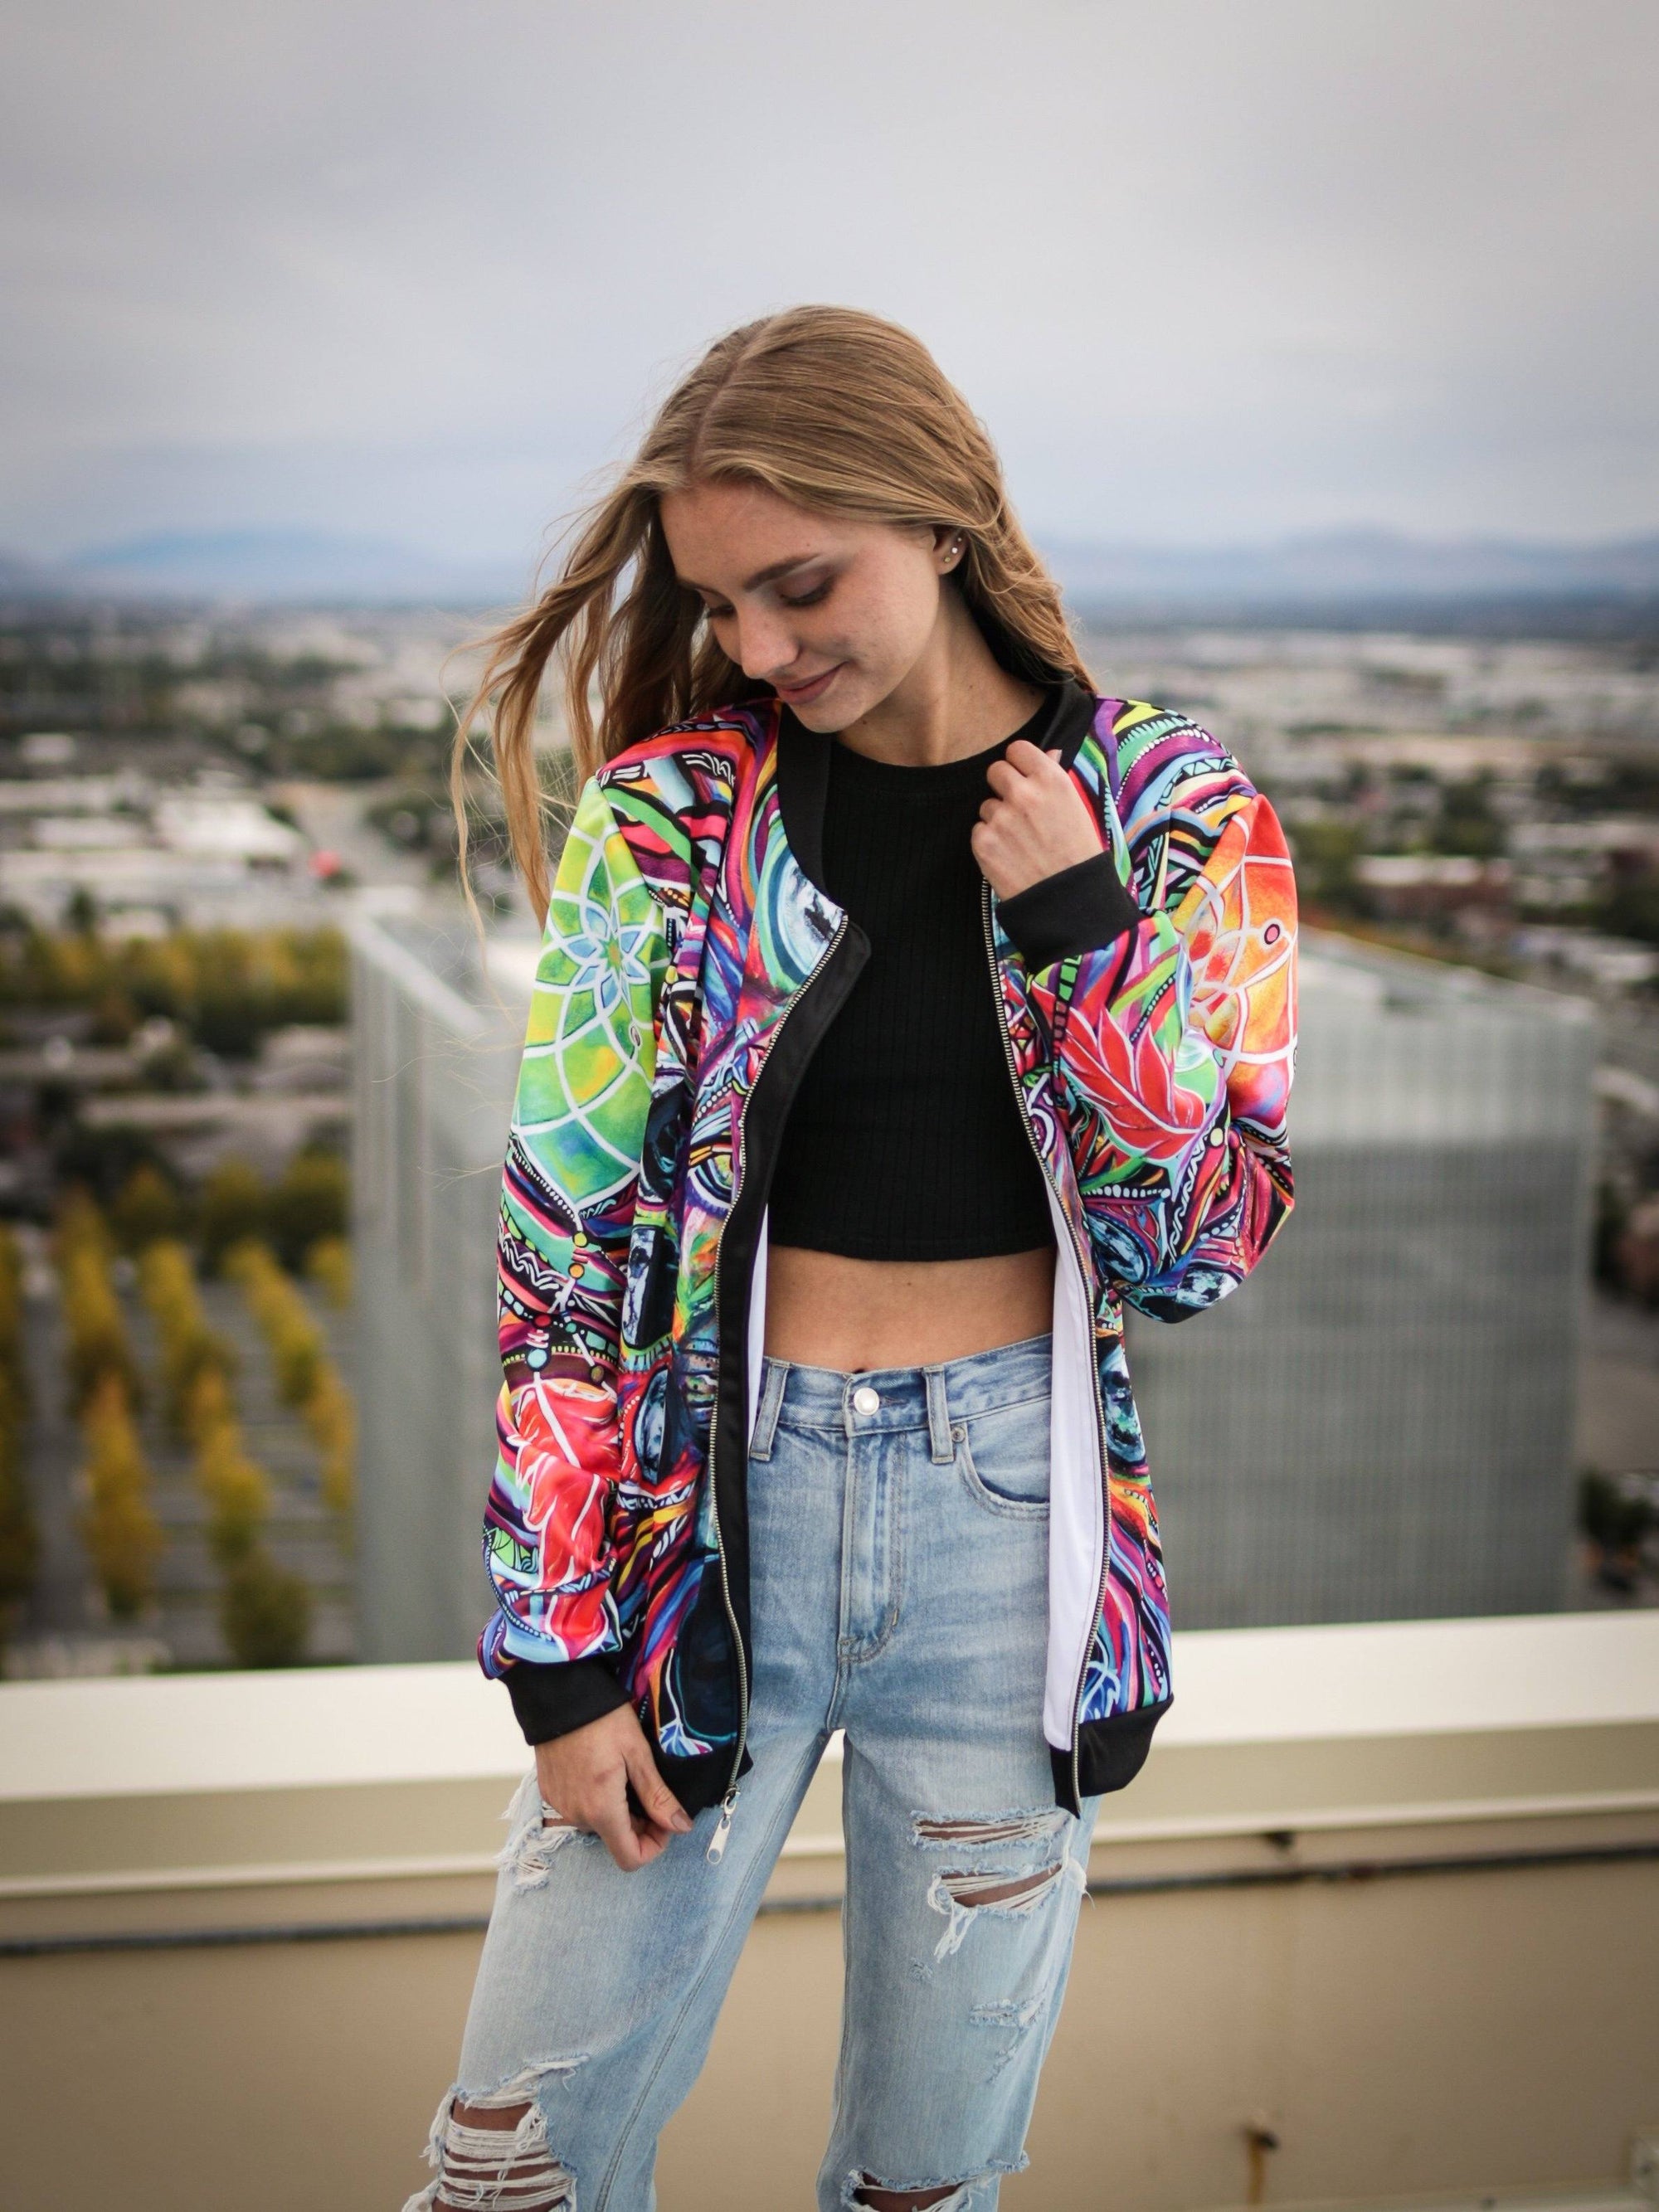 Trendy Bright Colorful Neon Rainbow Spotted Fashion Bomber Jacket